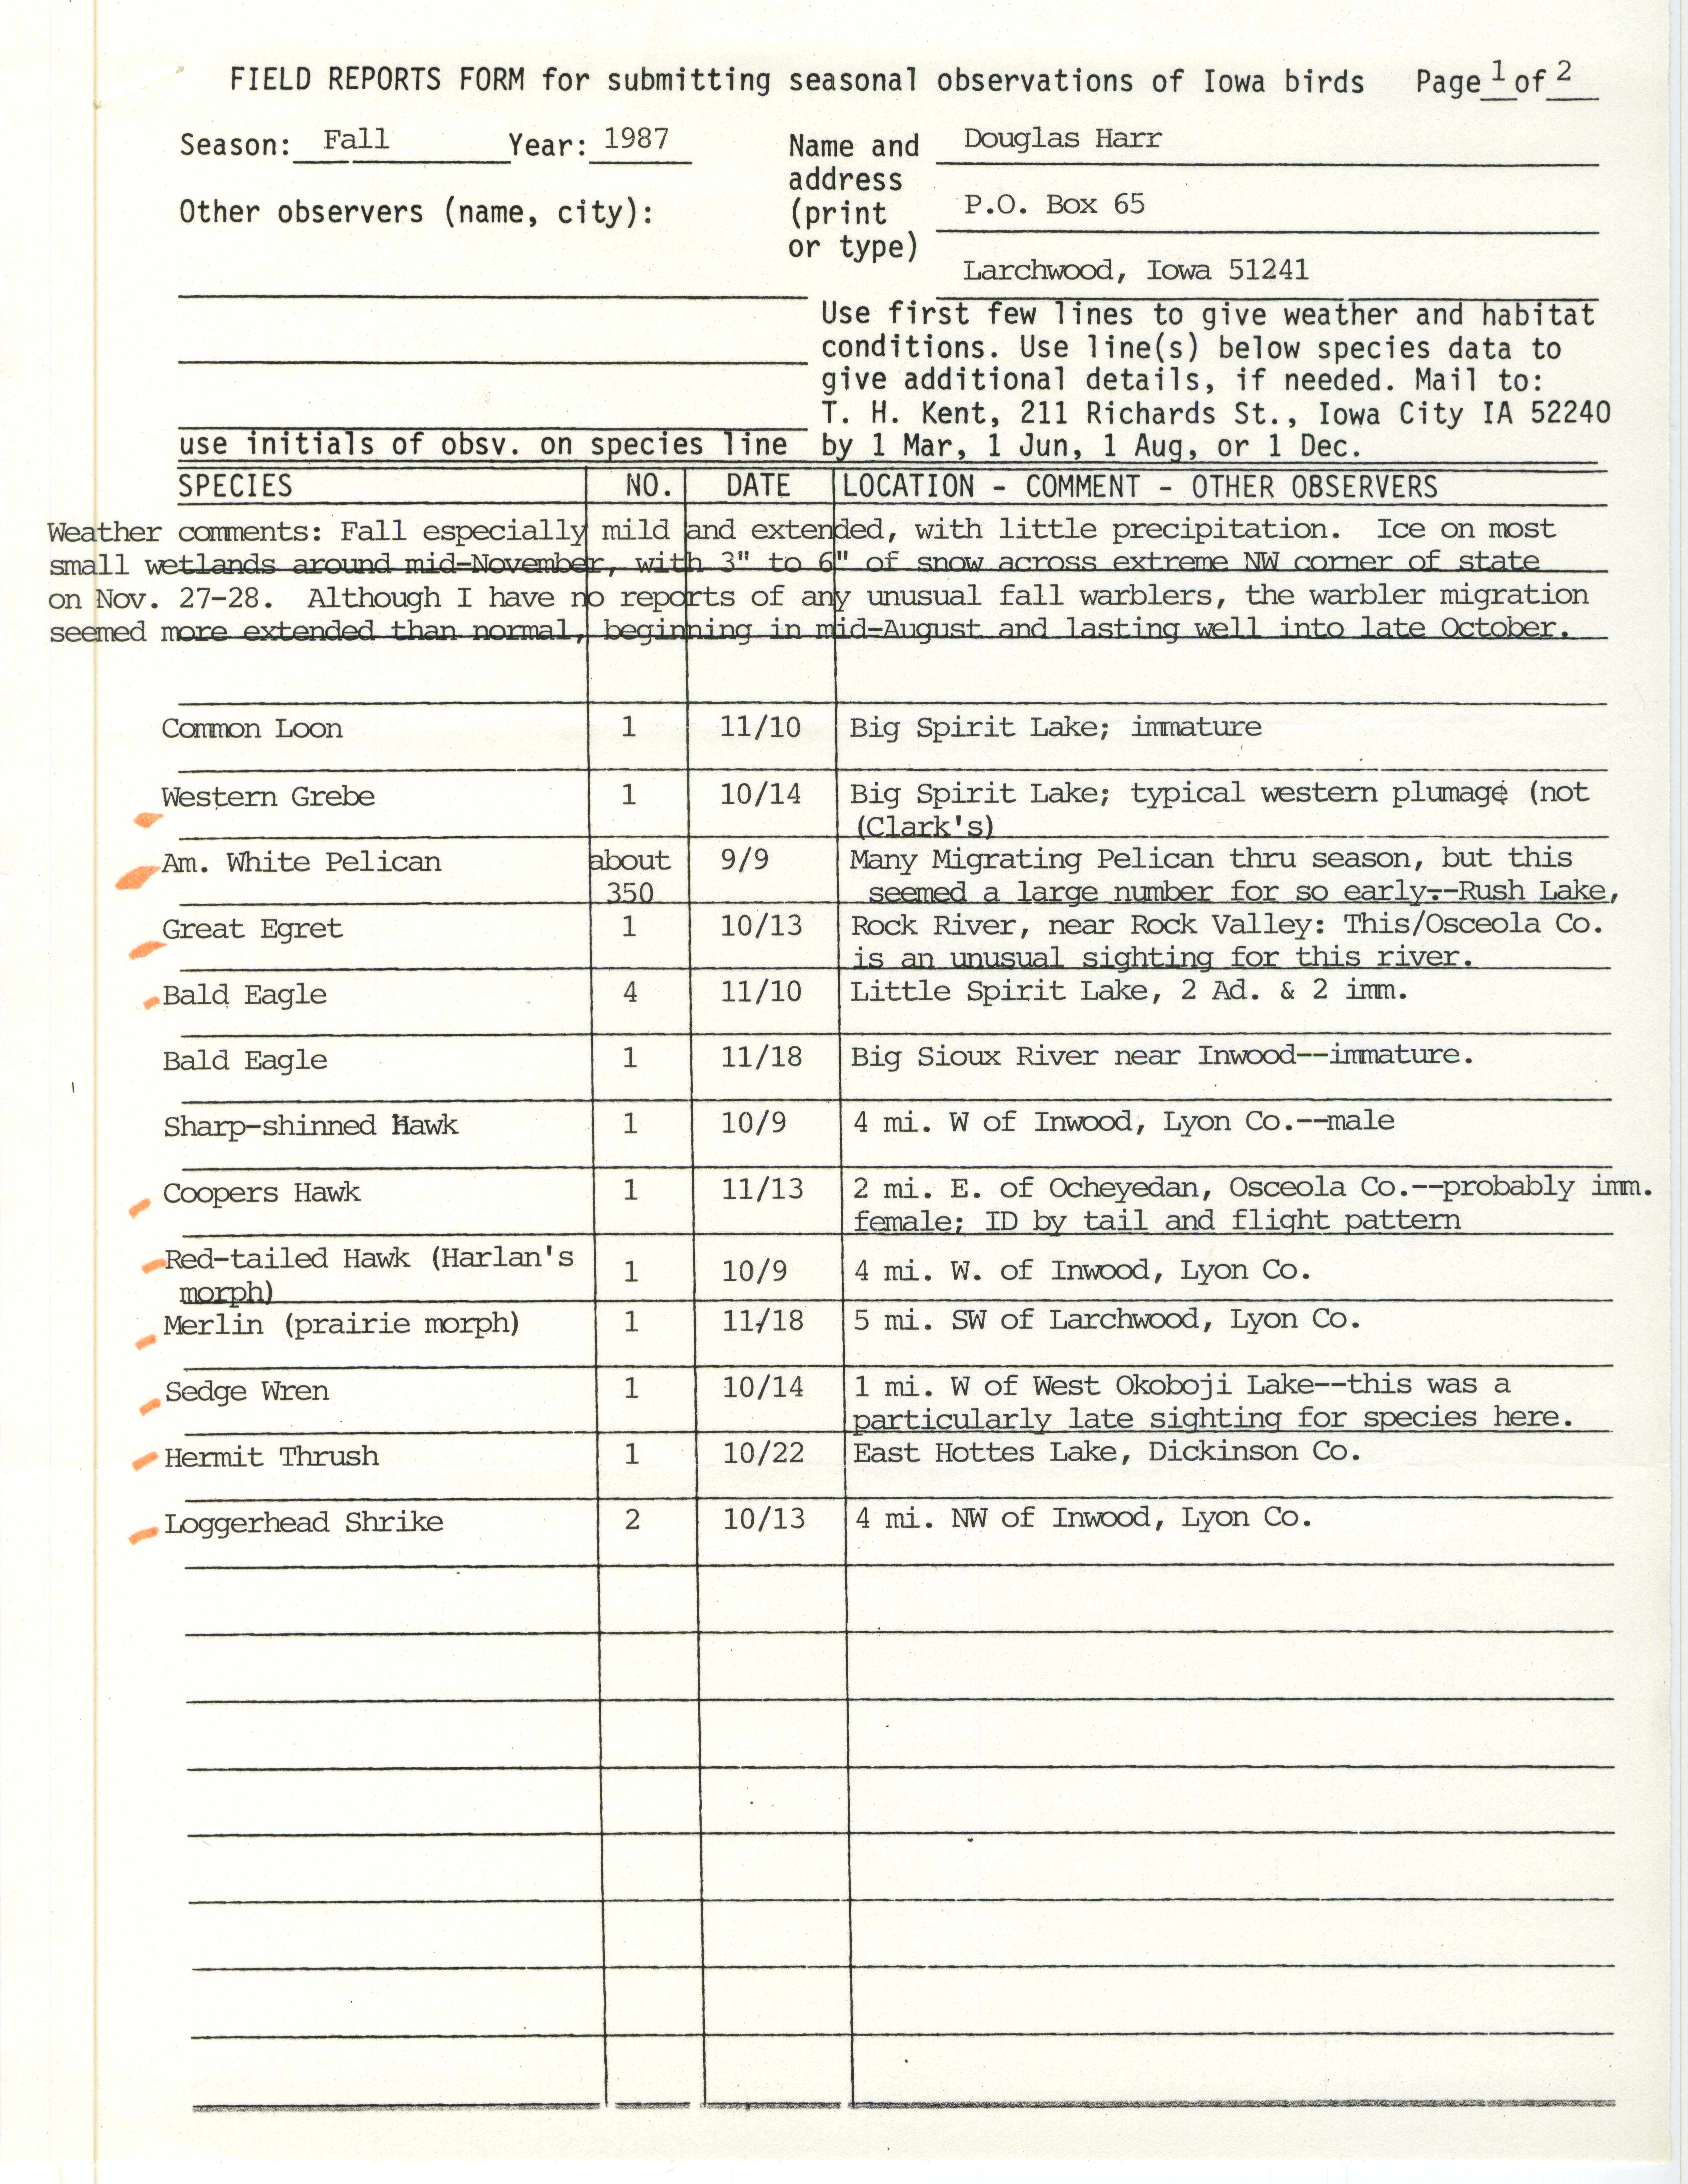 Field reports form for submitting seasonal observations of Iowa birds, Douglas C. Harr, fall 1987